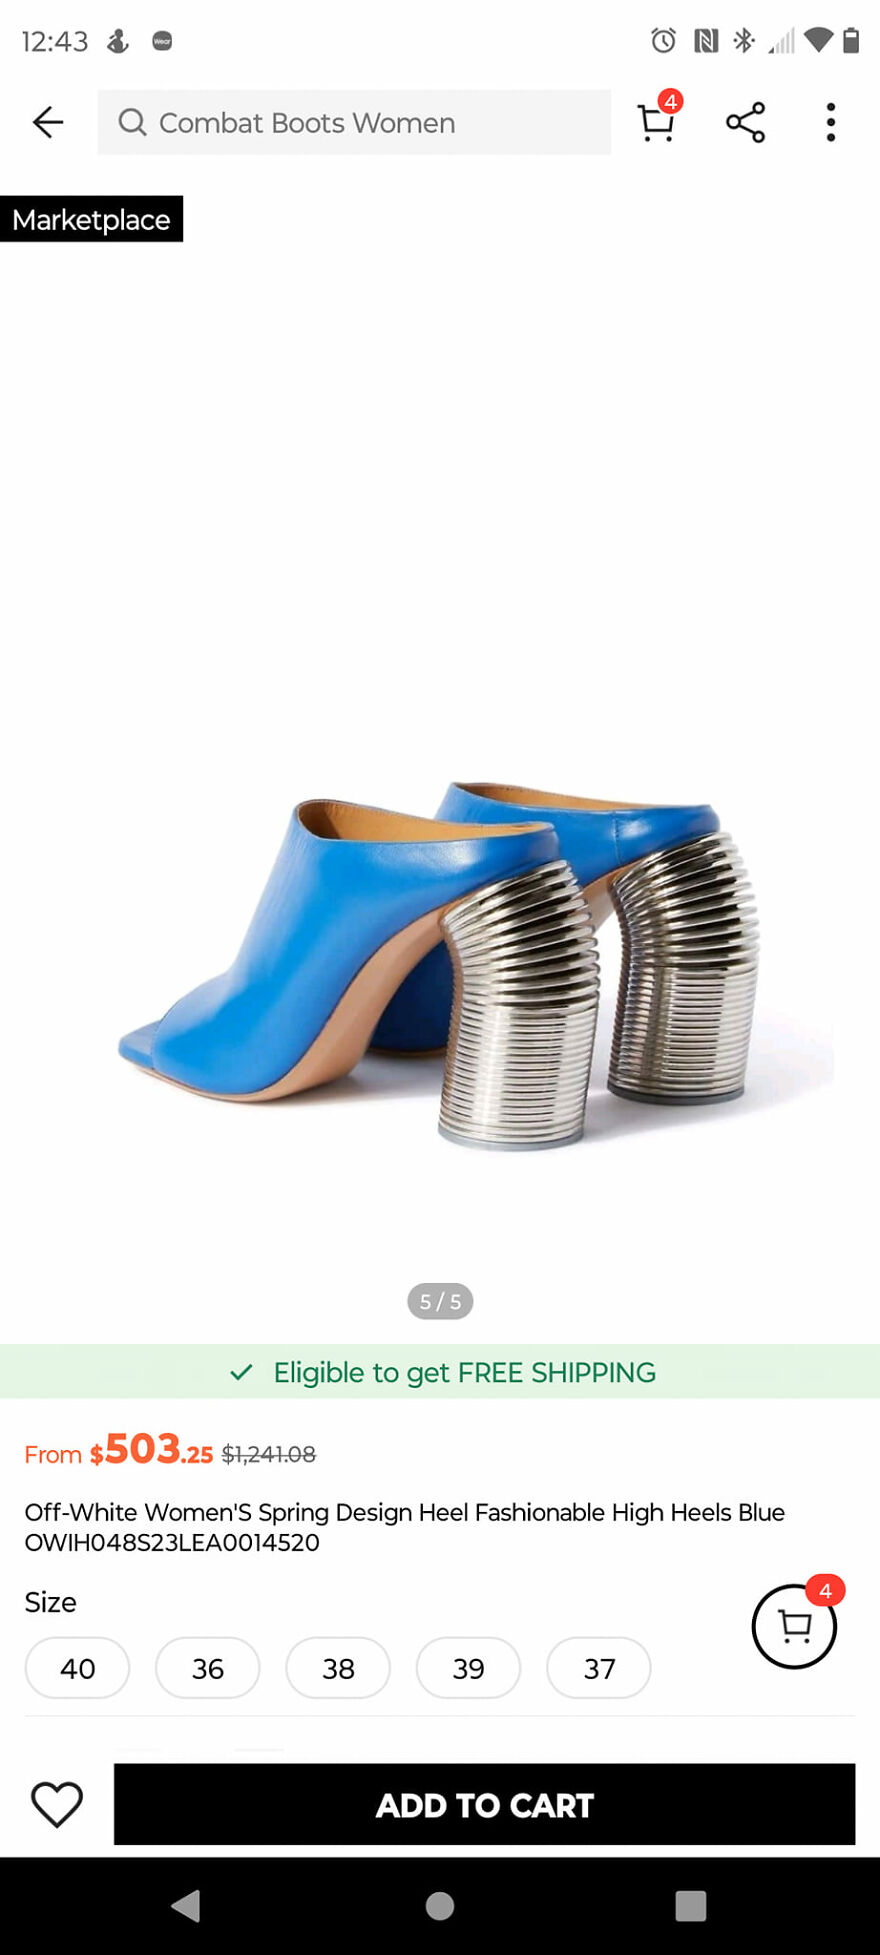 Not A Dress But Worth A Share. Wonder If It Works Like A Slinky On The Stairs? 🤔 Oh, And The Price. 😬